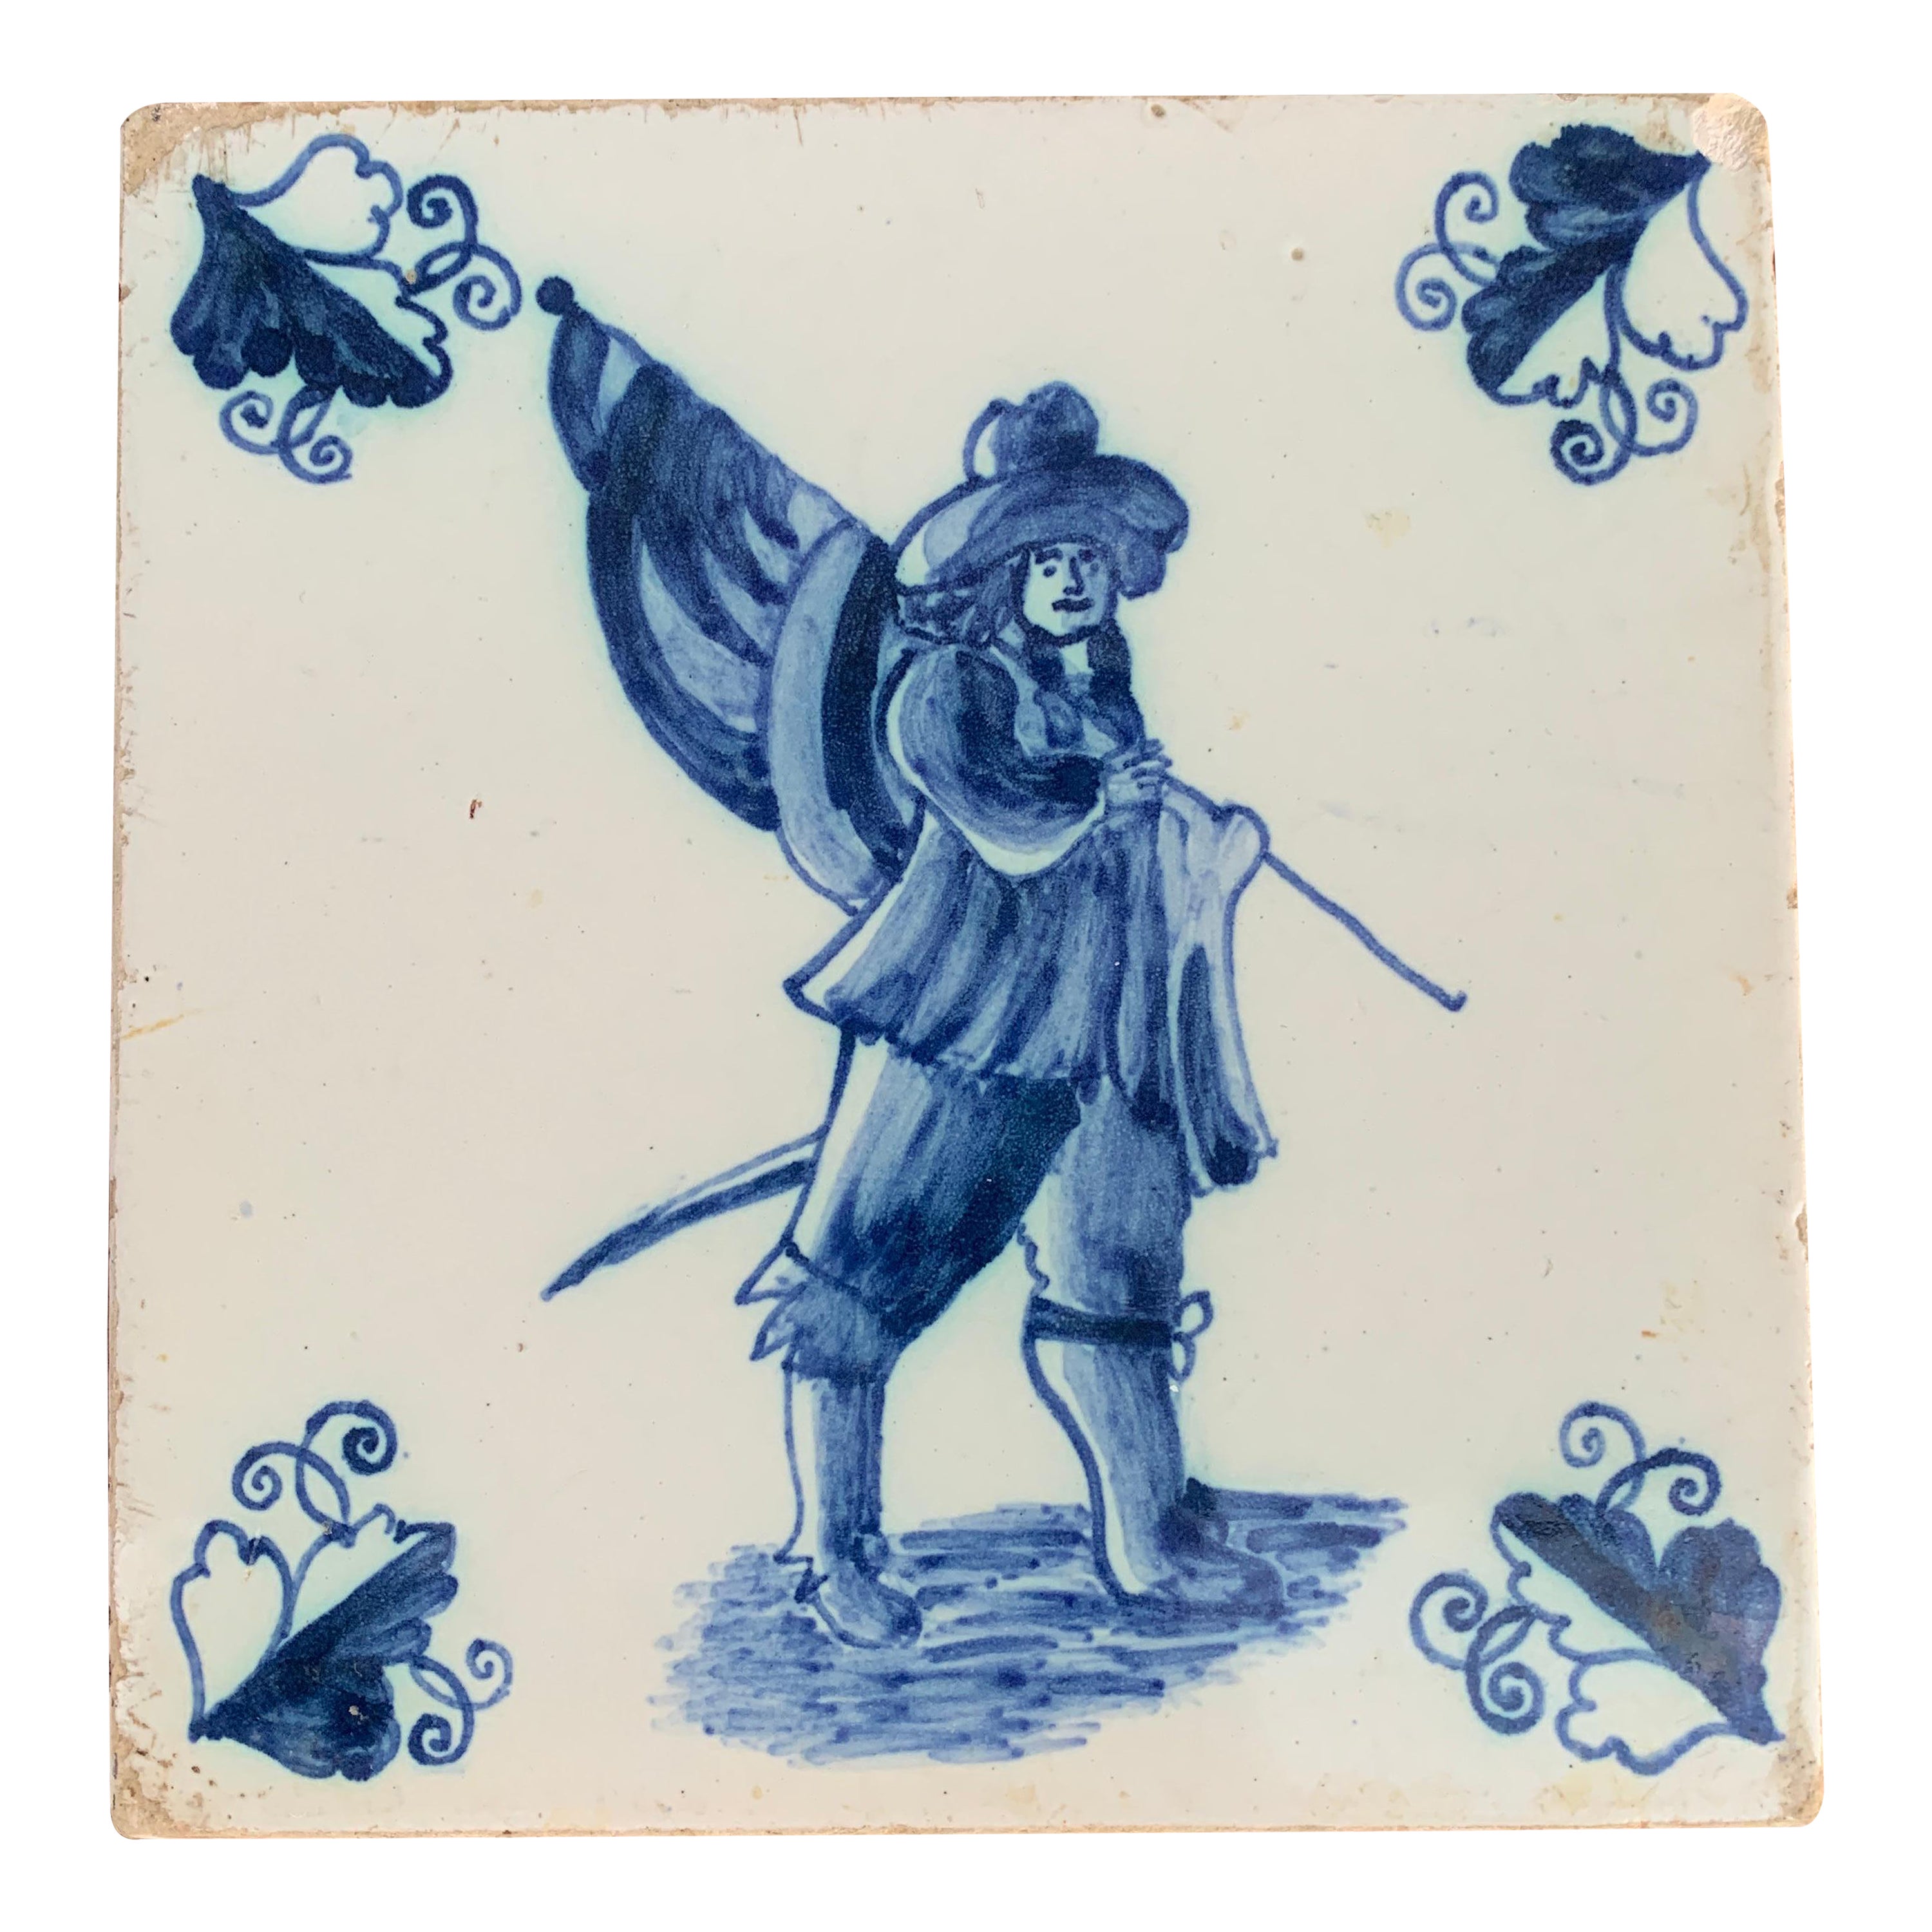 Antique Dutch Delft Style Blue and White Tile Featuring a Soldier